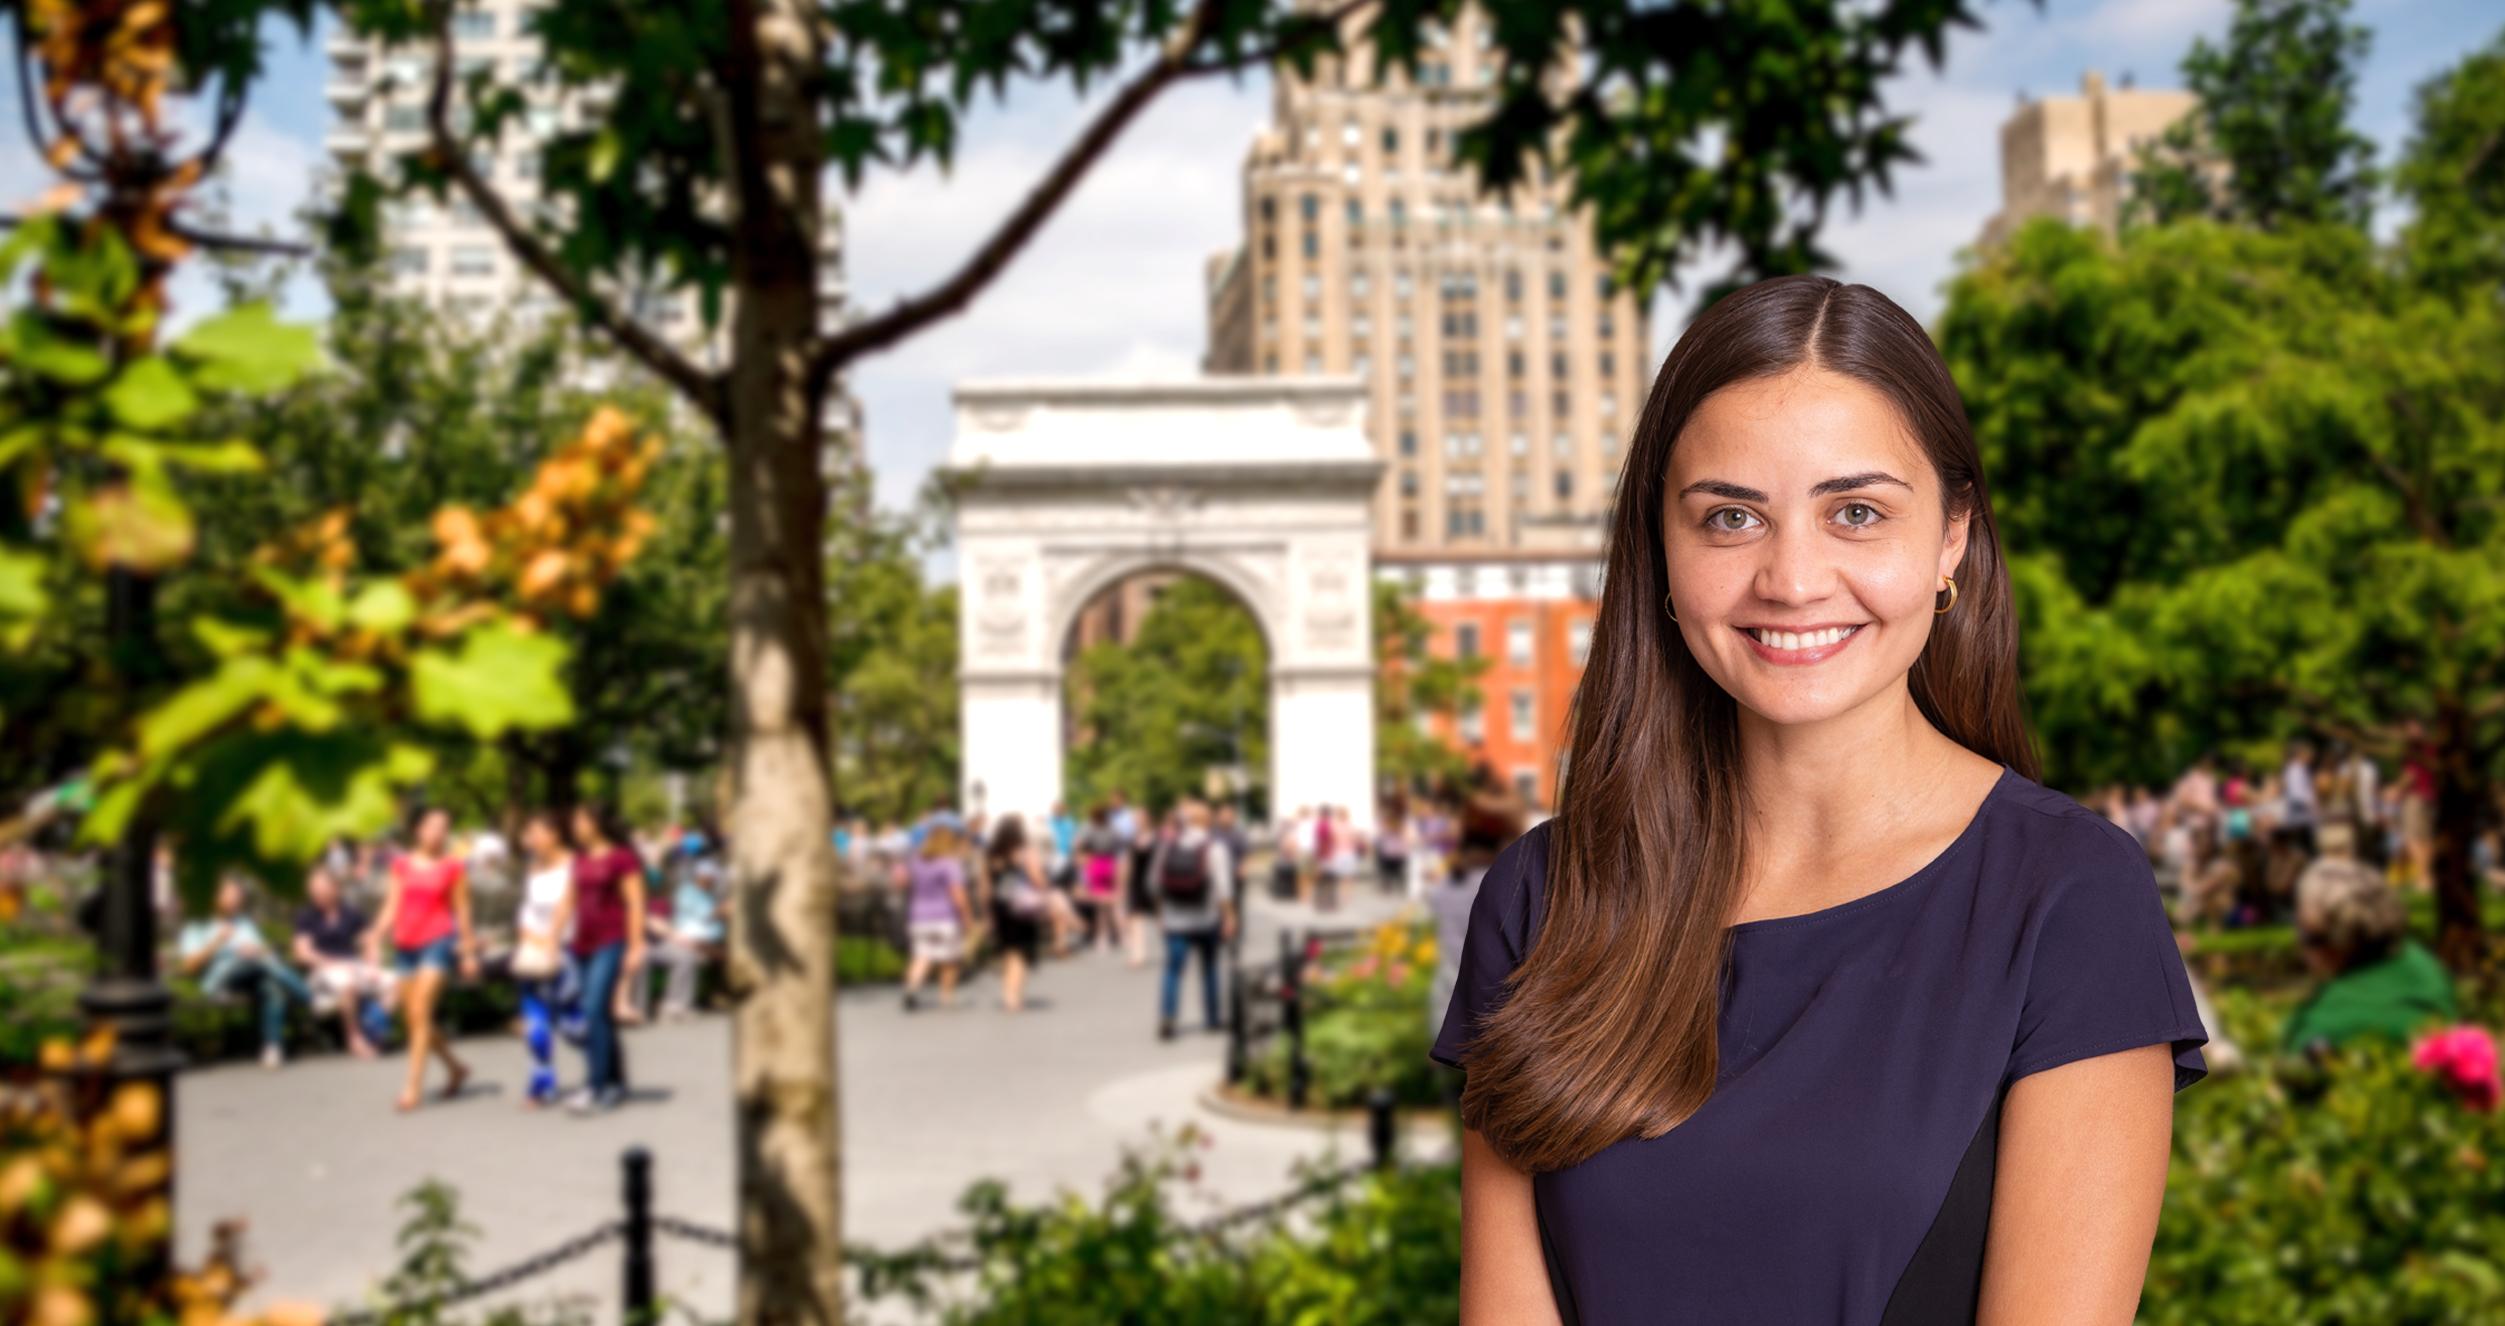 Female student with brown hair and blue dress in front of a blurred background of Washington Square Park